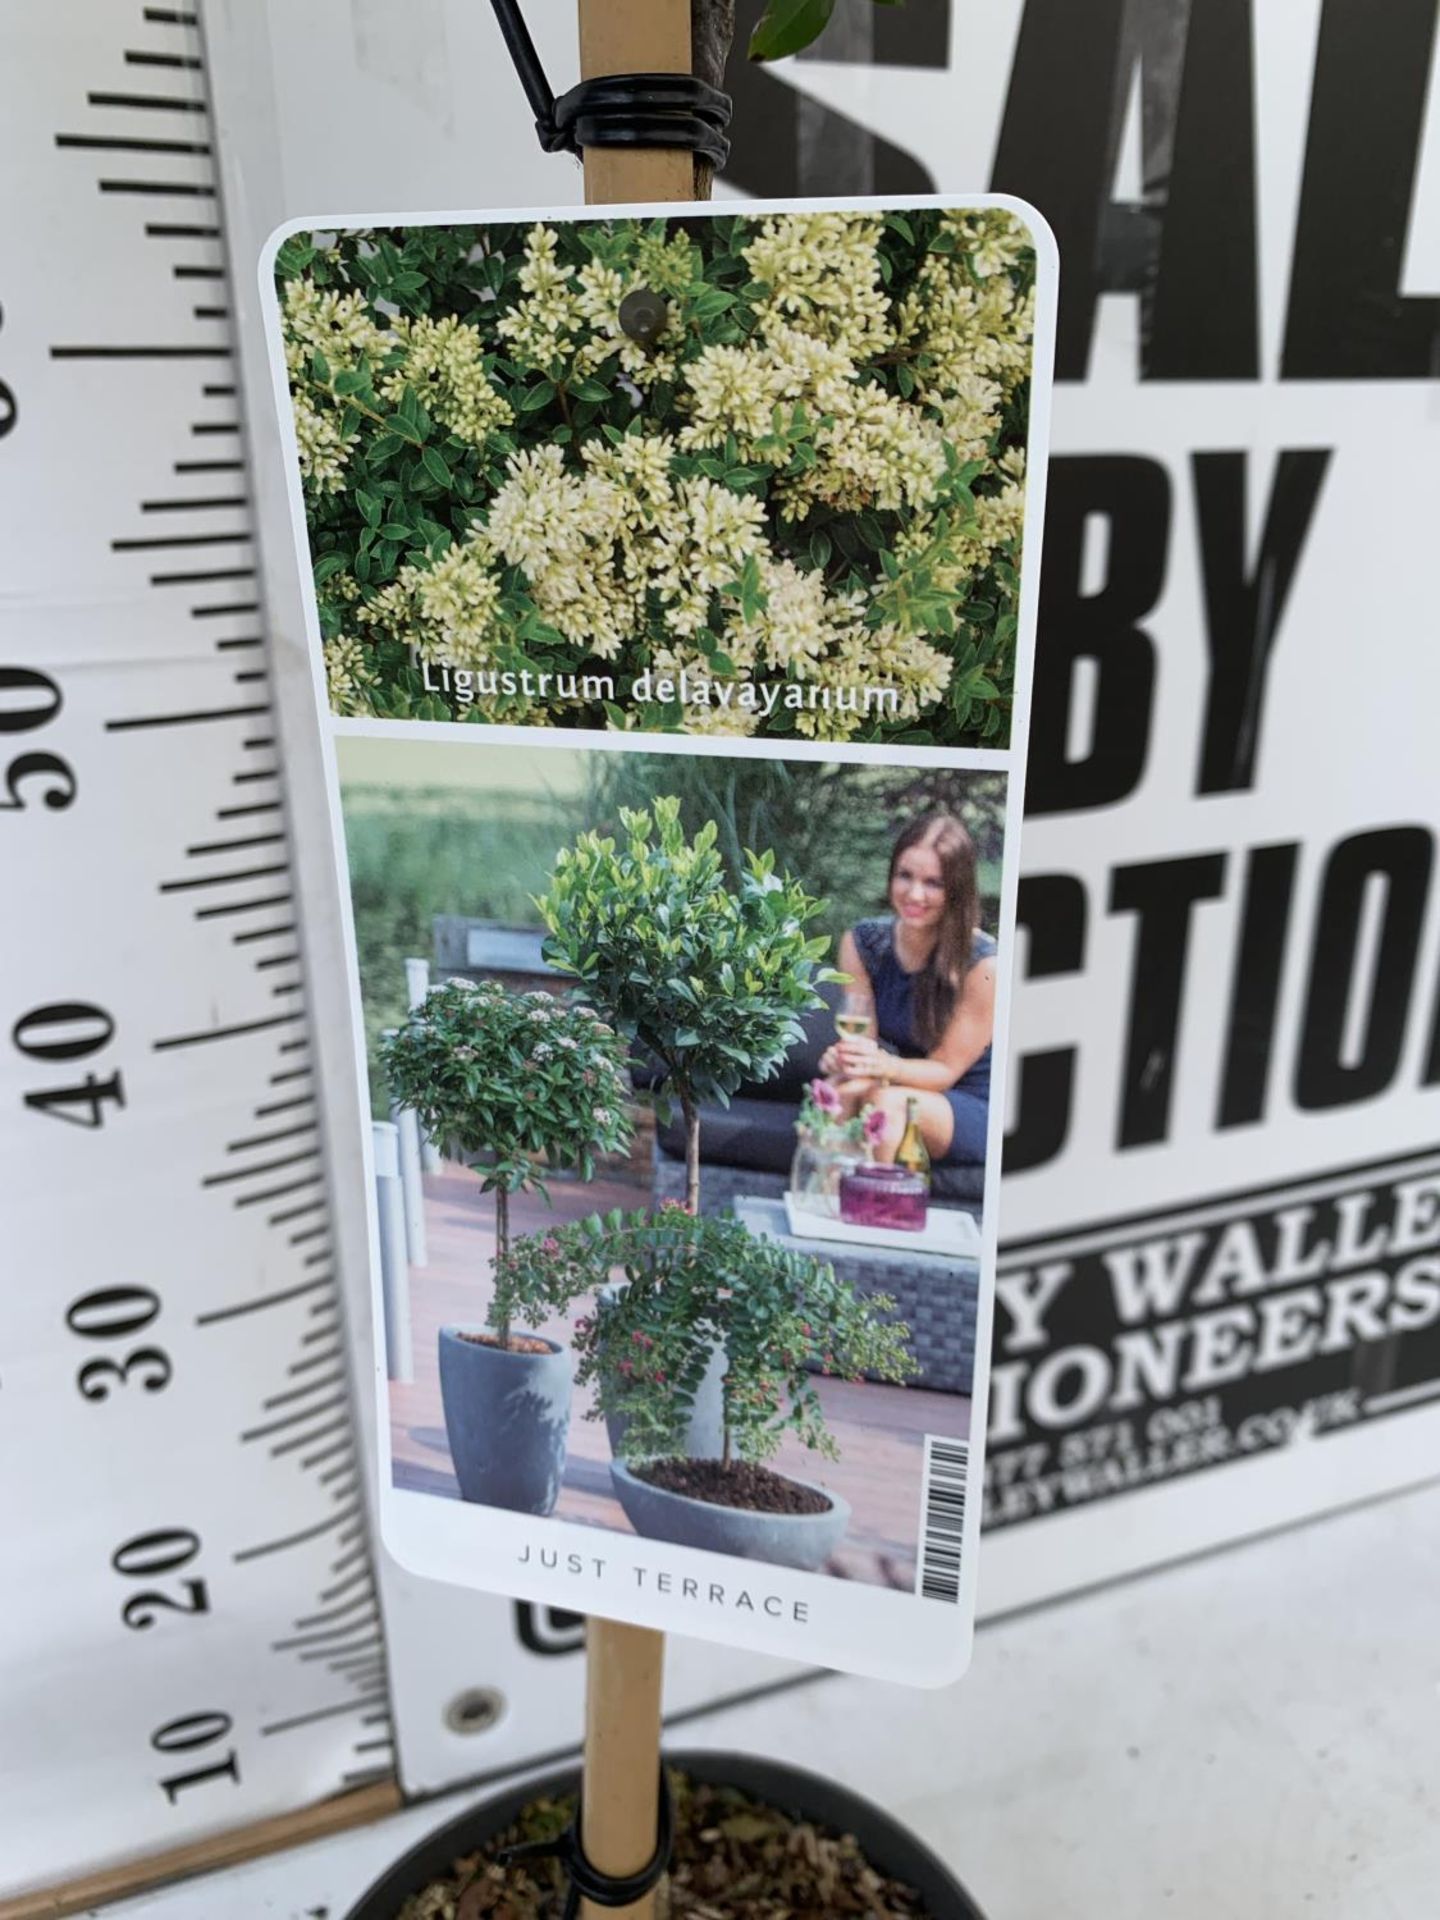 TWO LIGUSTRUM DELAVAYANUM STANDARD TREES APPROX 100CM IN HEIGHT IN 3LTR POTS PLUS VAT TO BE SOLD FOR - Image 4 of 4